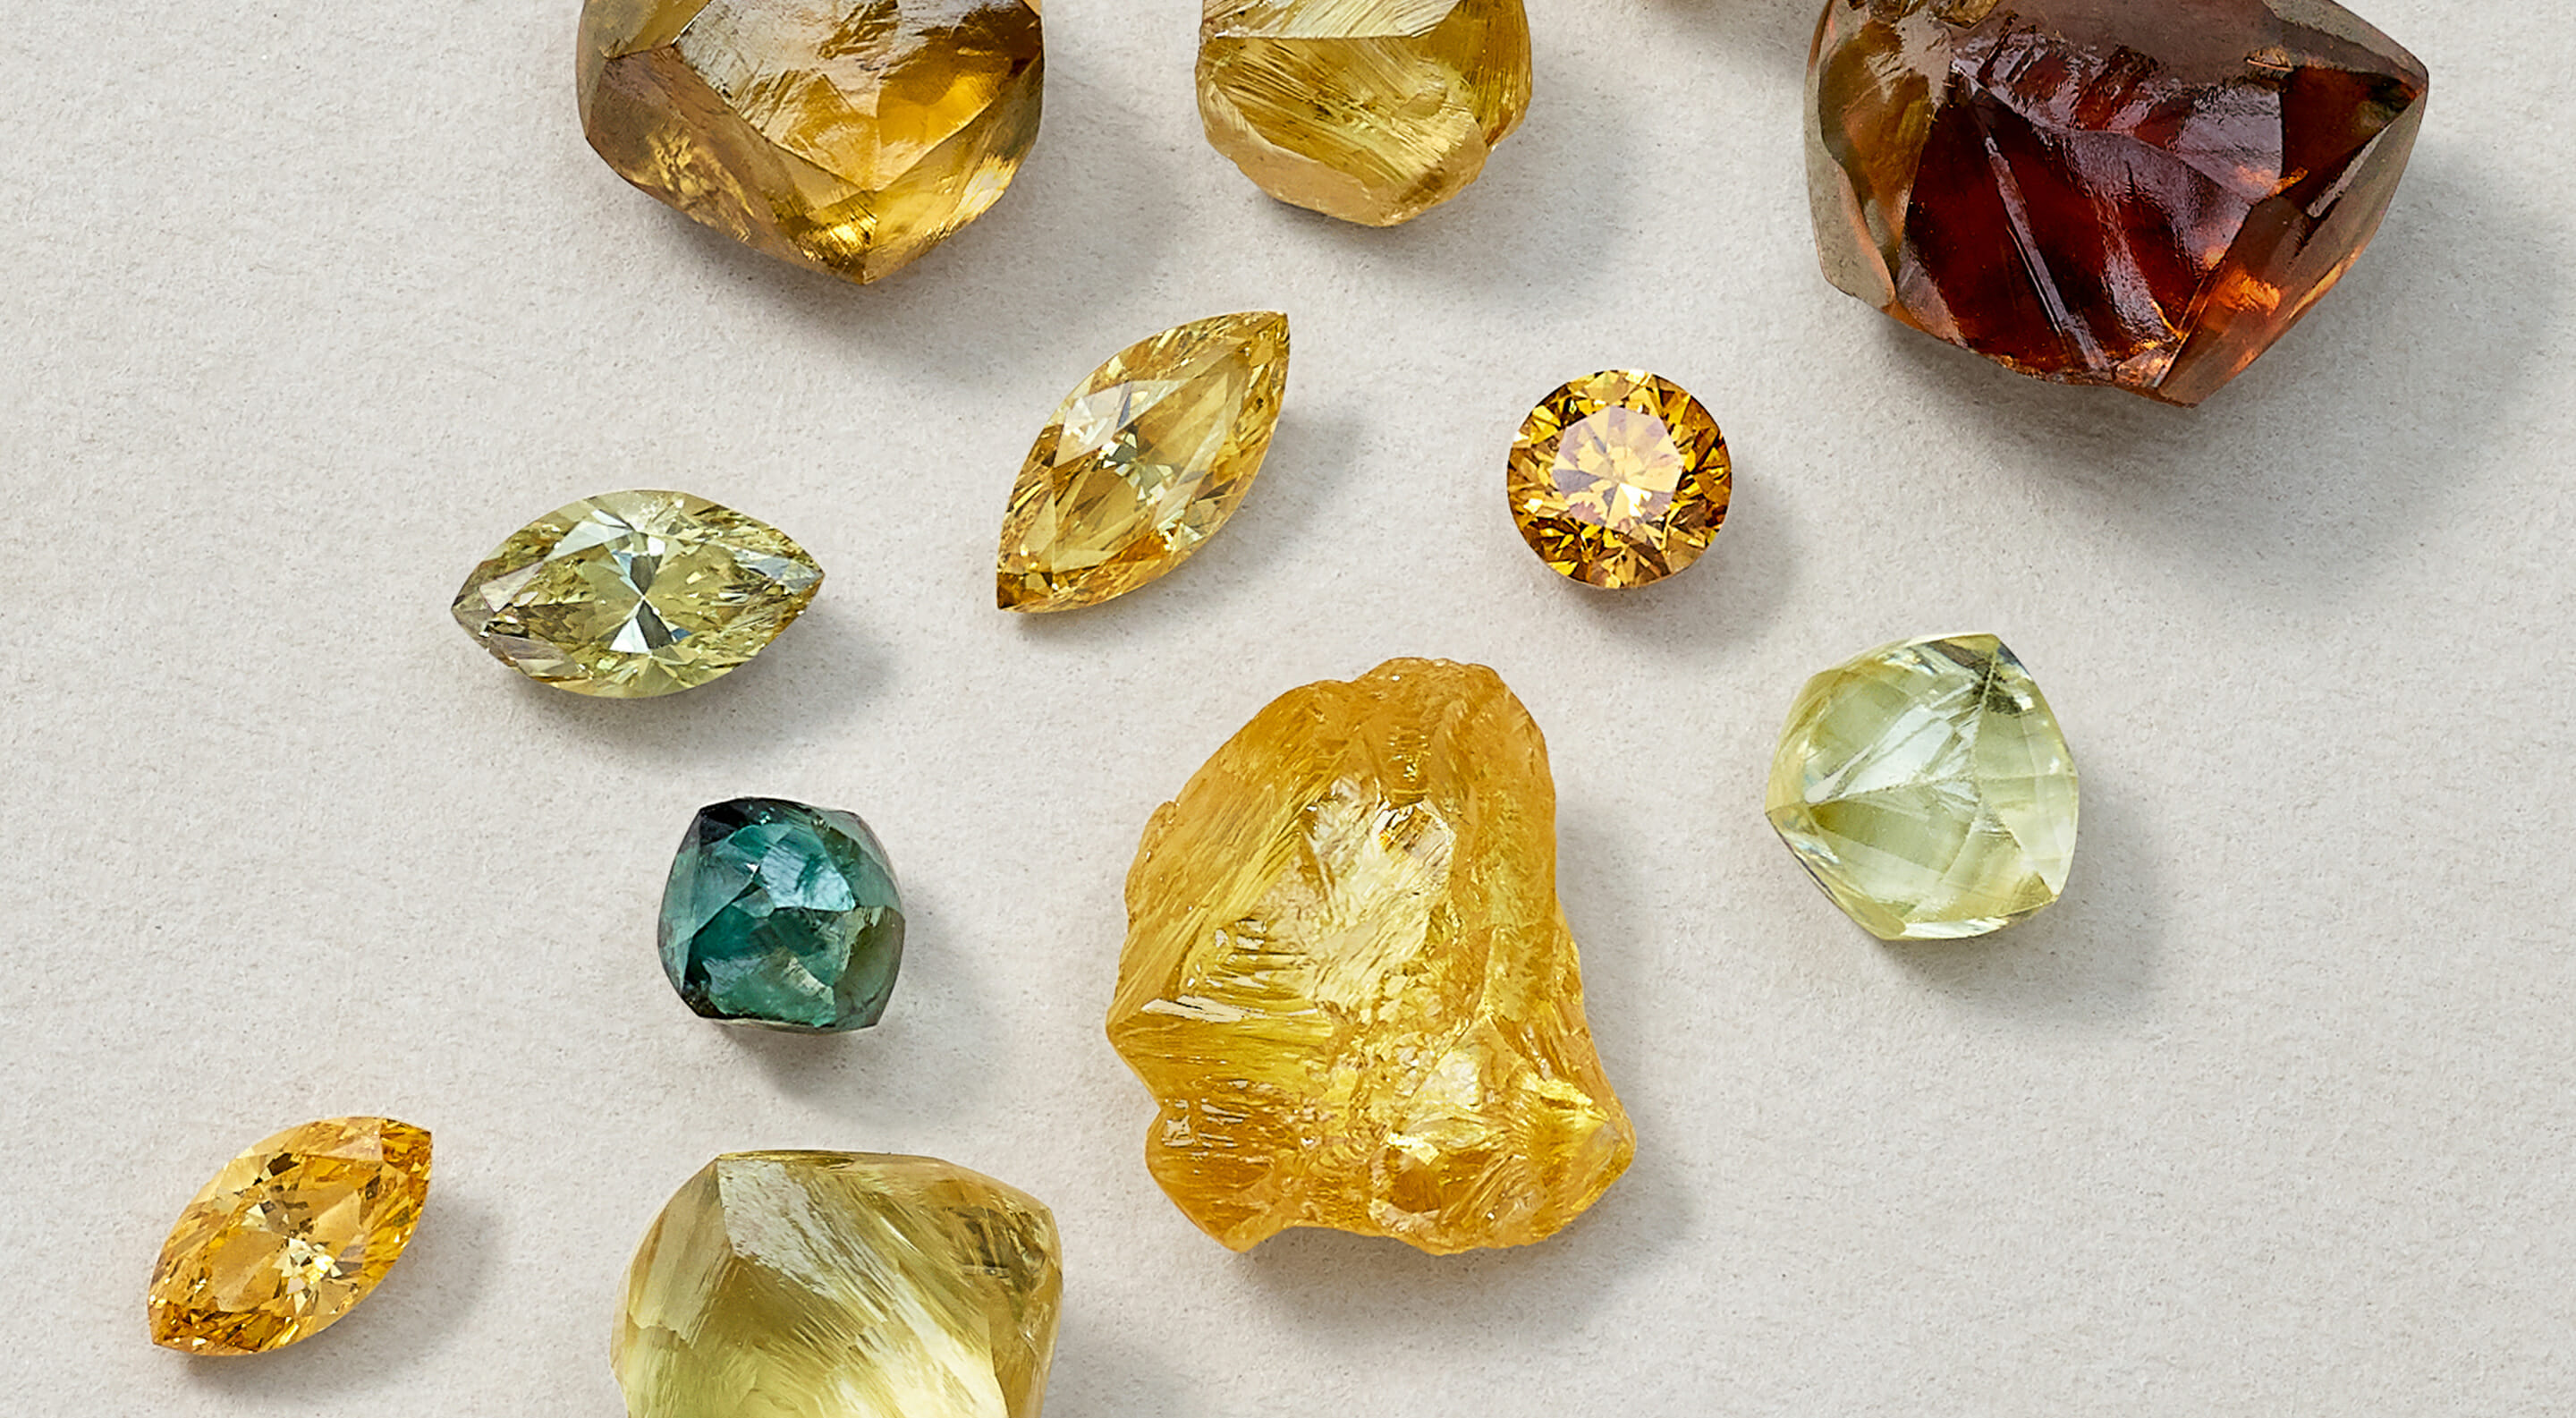 All of these colorful natural rough diamonds are one-in-a-million